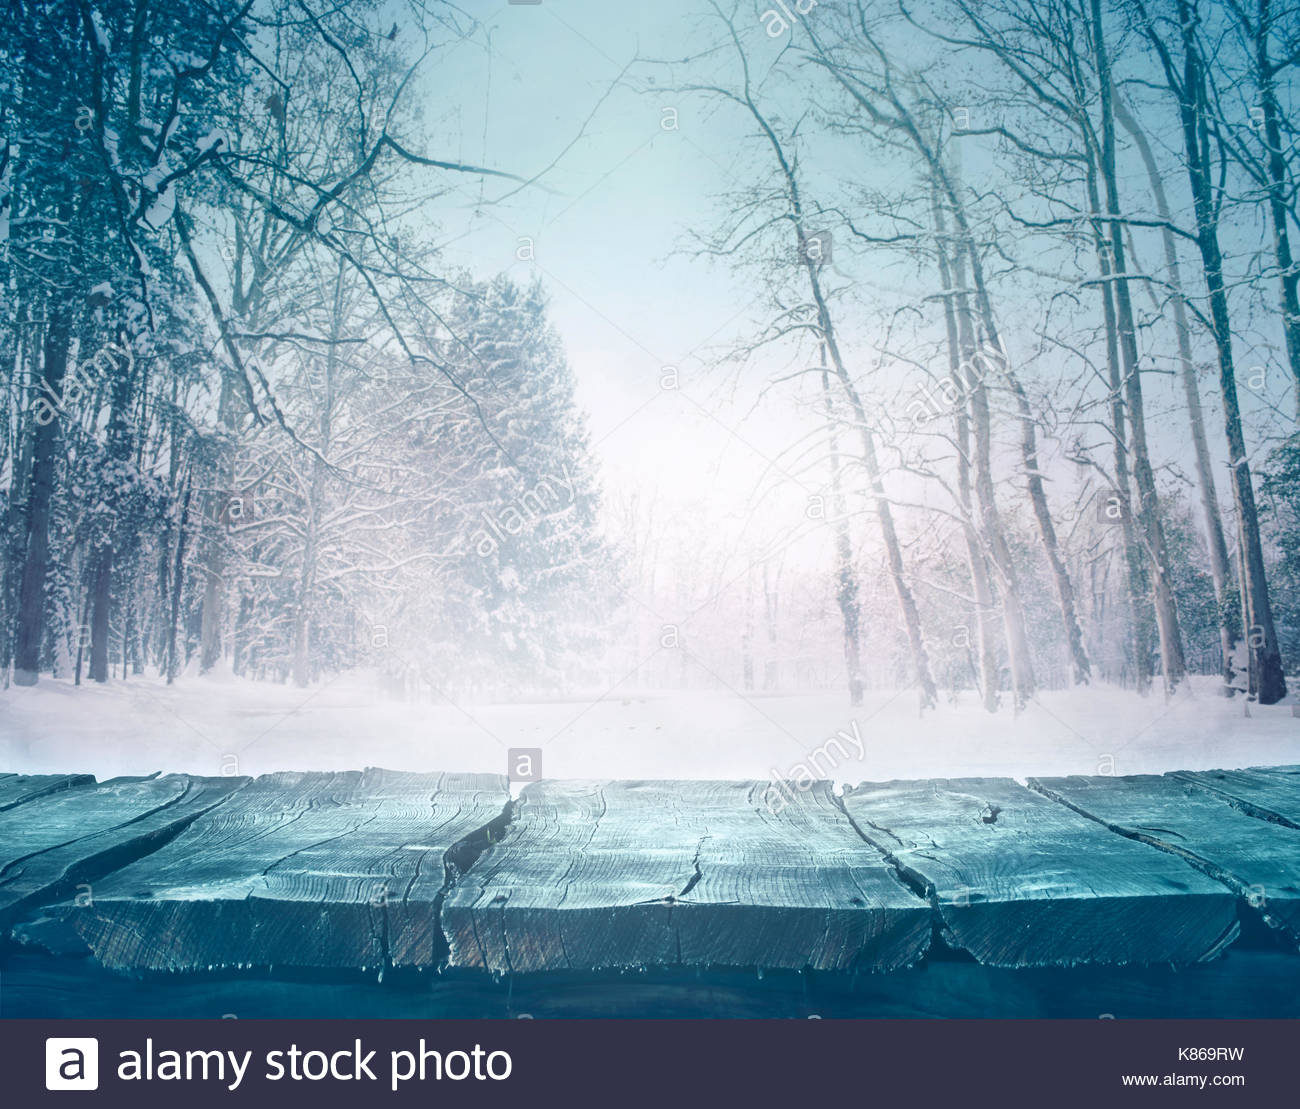 Winter Background Snow Landscape With Wooden Table In